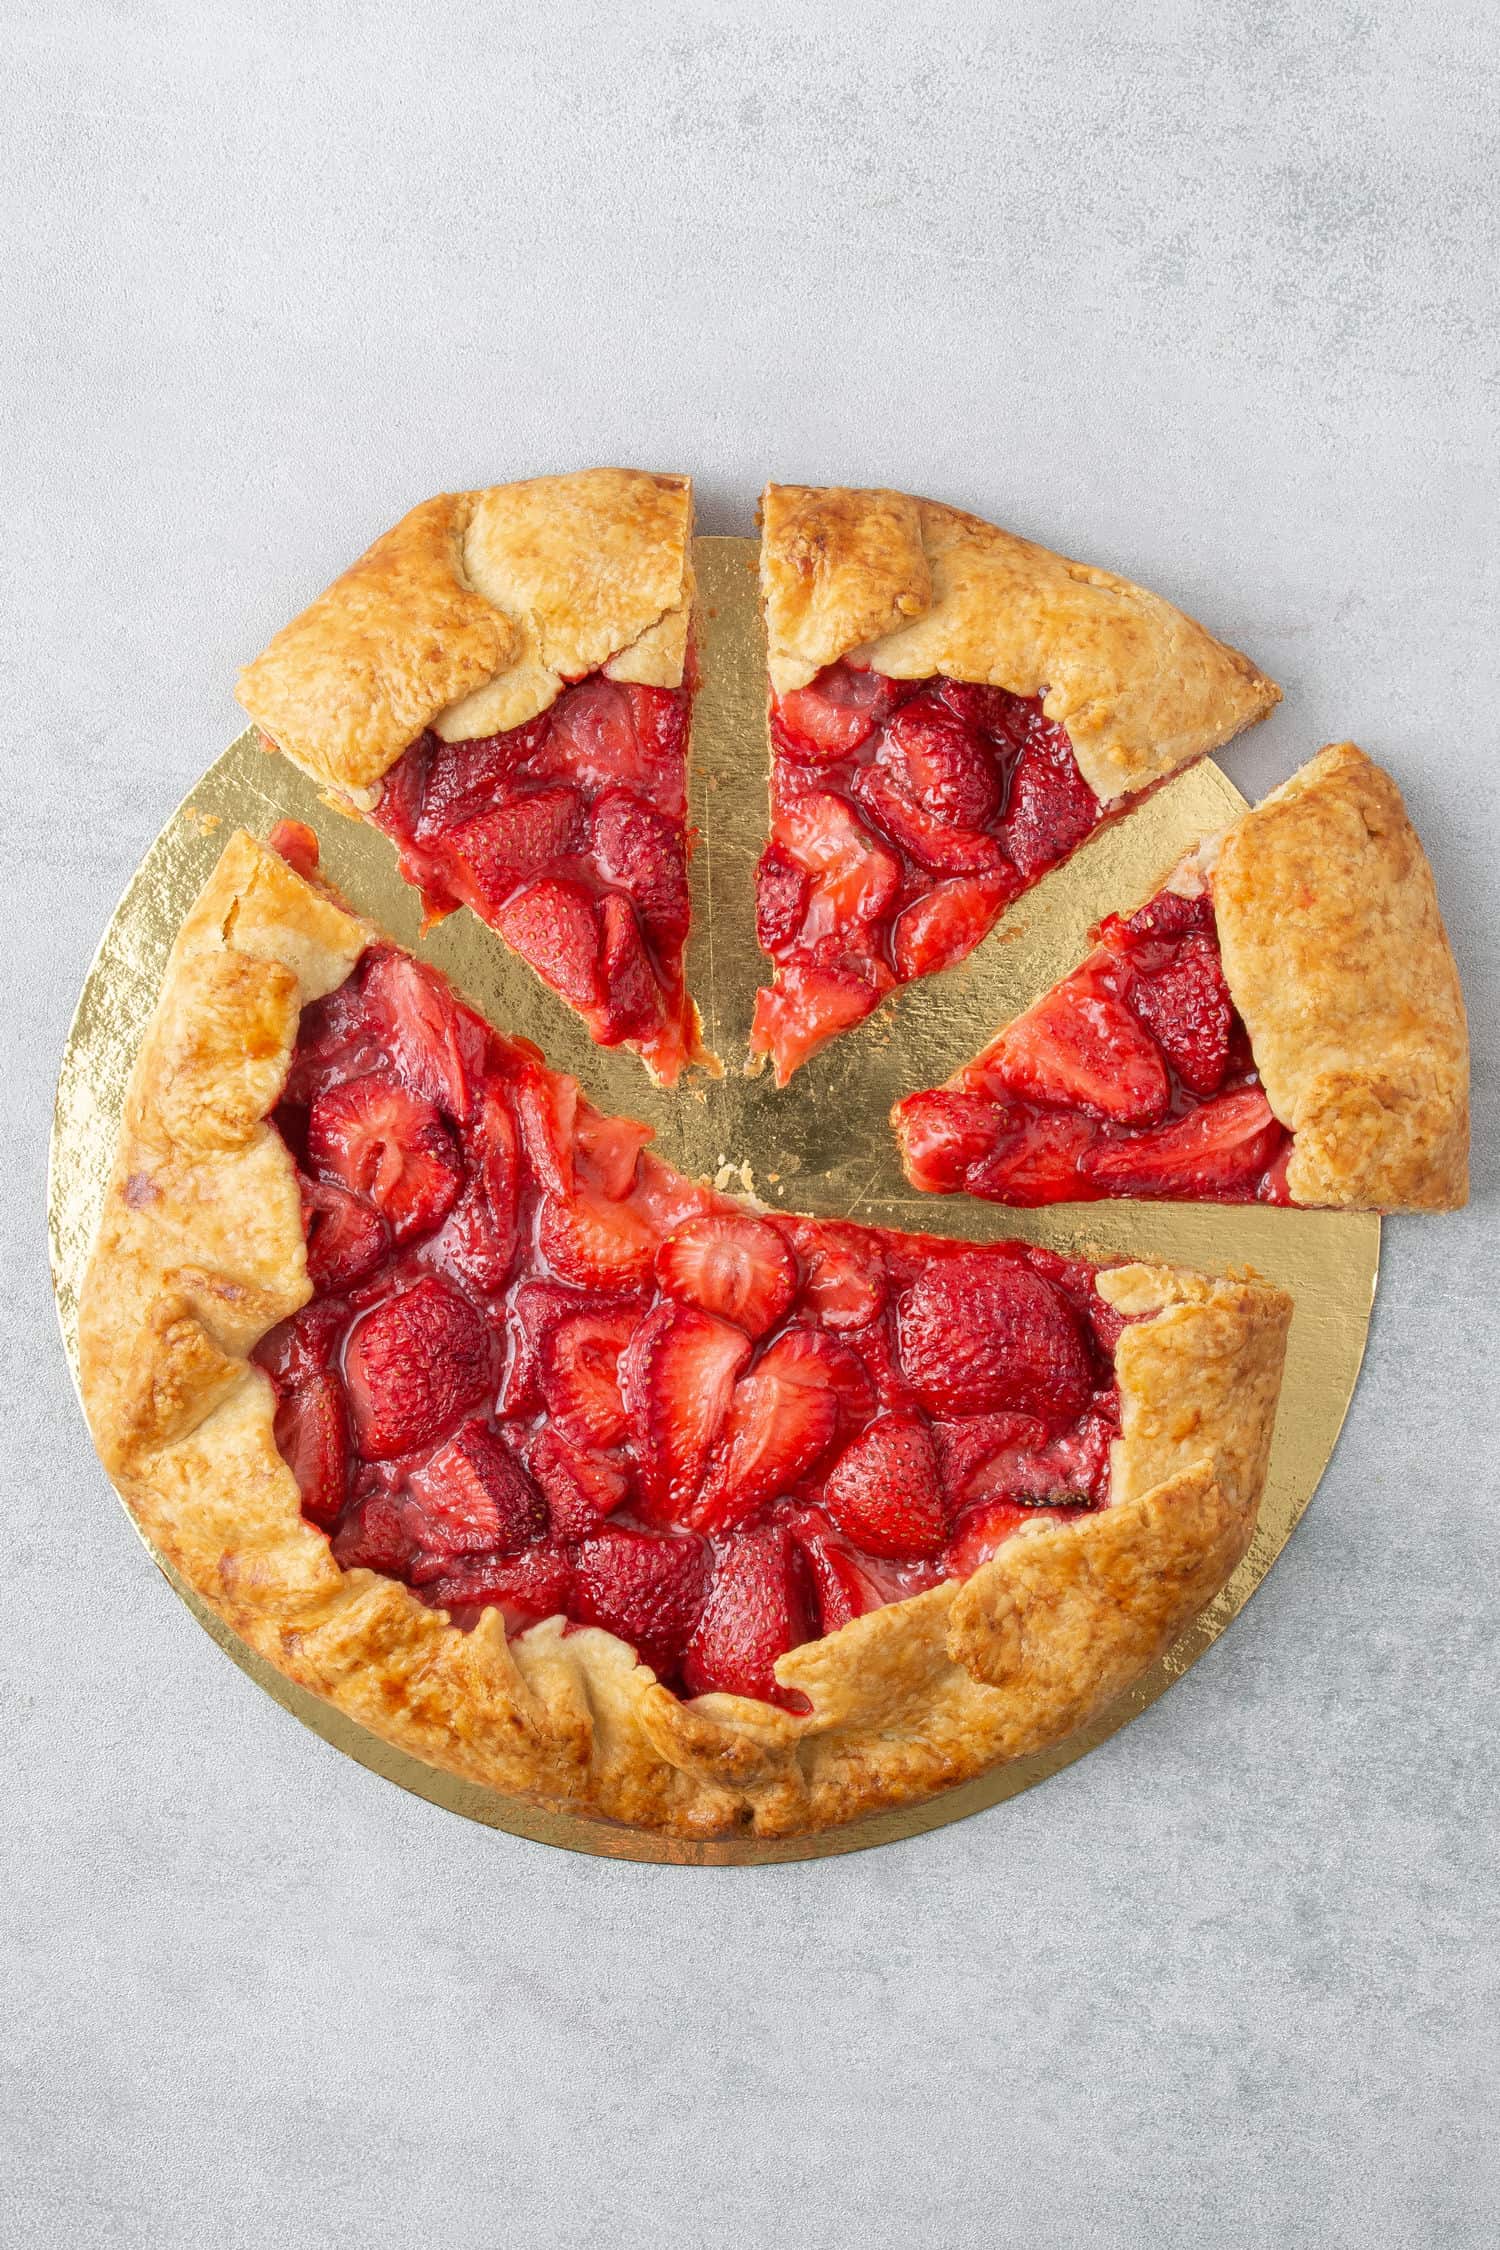 Strawberry Galette on a golden paper plate cut into 4 slices.